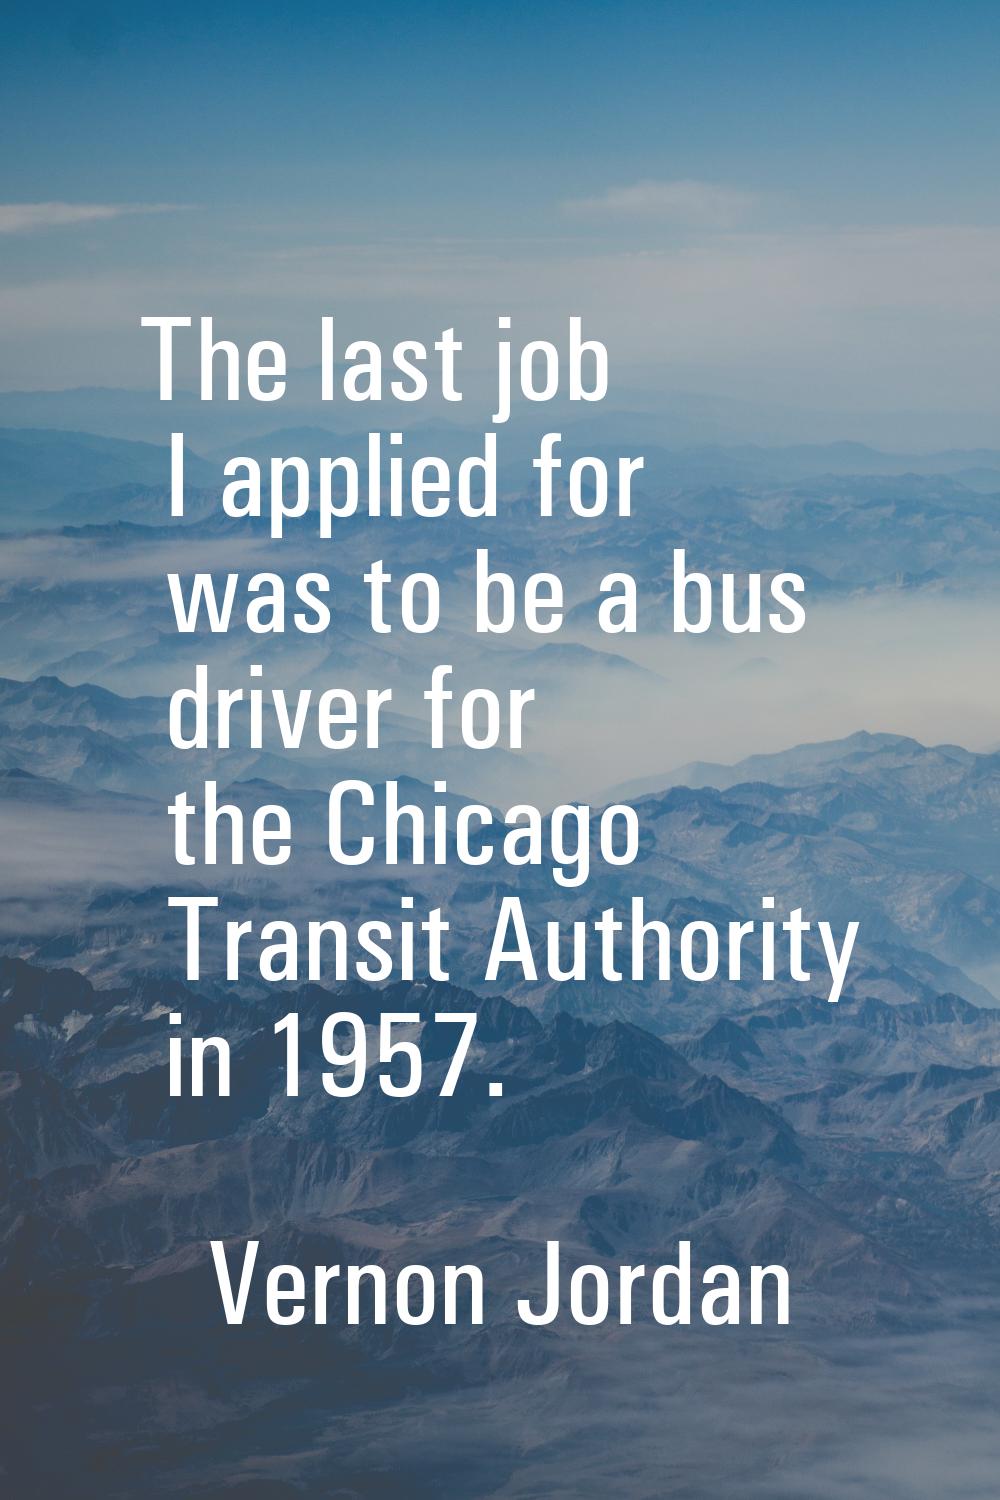 The last job I applied for was to be a bus driver for the Chicago Transit Authority in 1957.